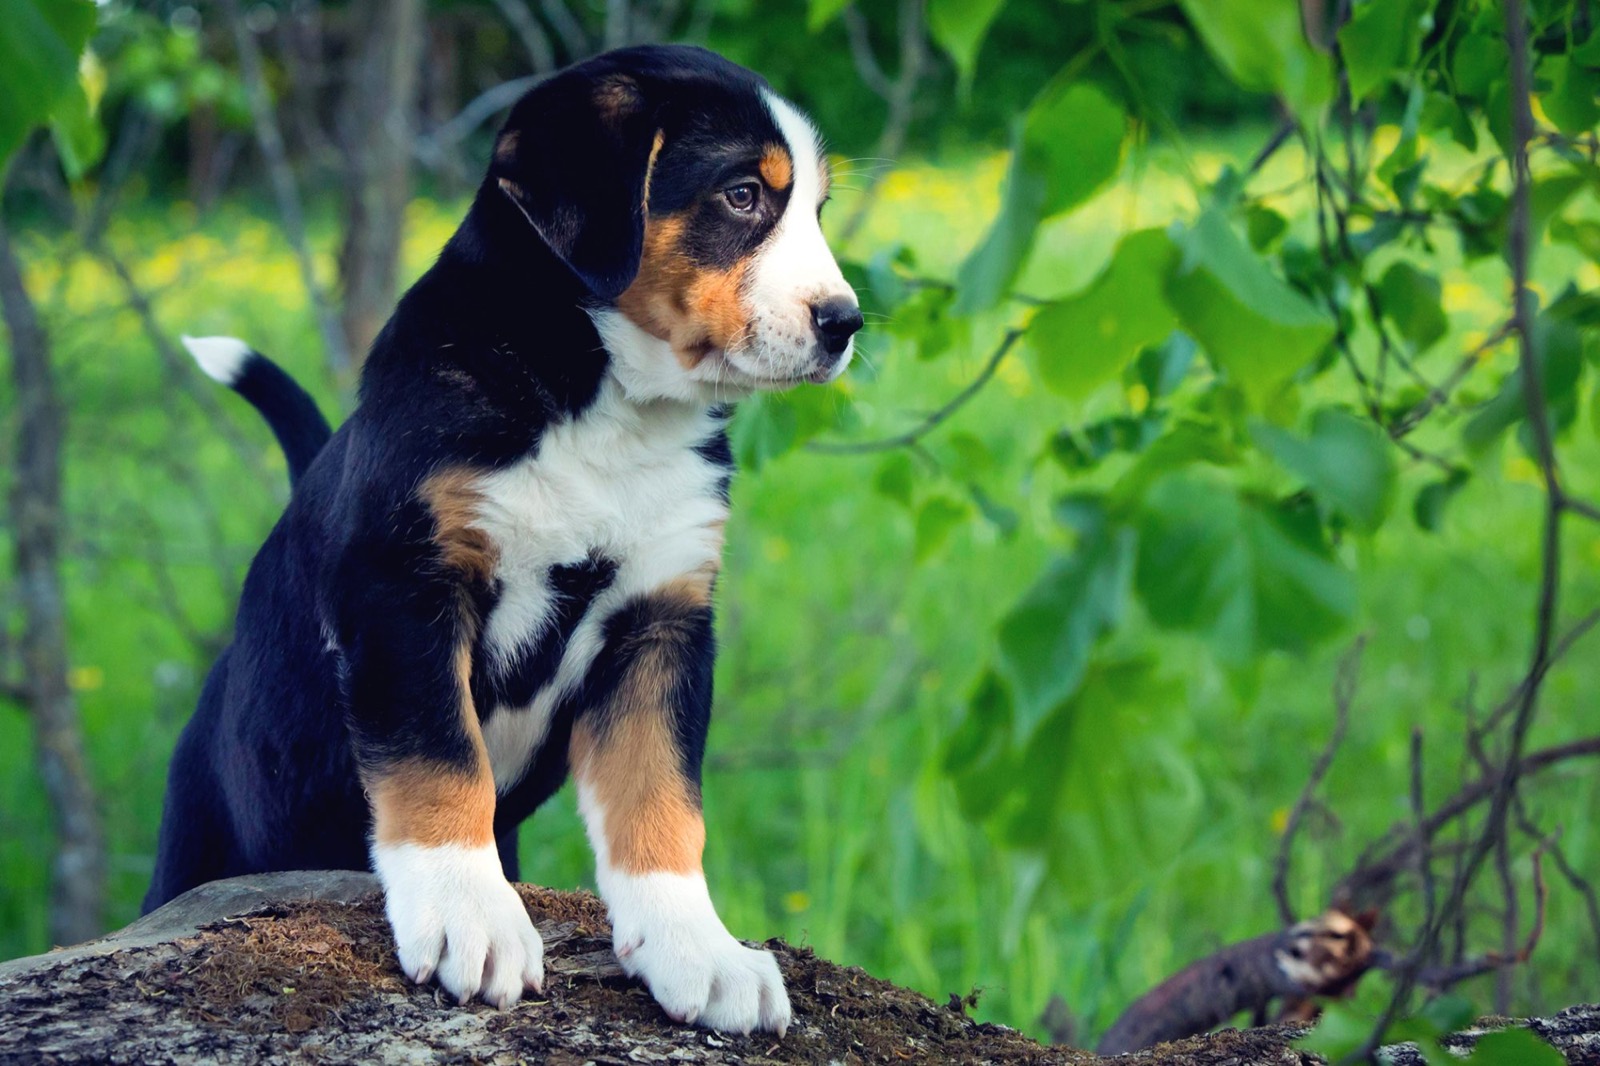 Can You Pass This Geography Quiz Where Every Question Comes With a 🐶 Dog-Related Clue? Greater Swiss Mountain Dog